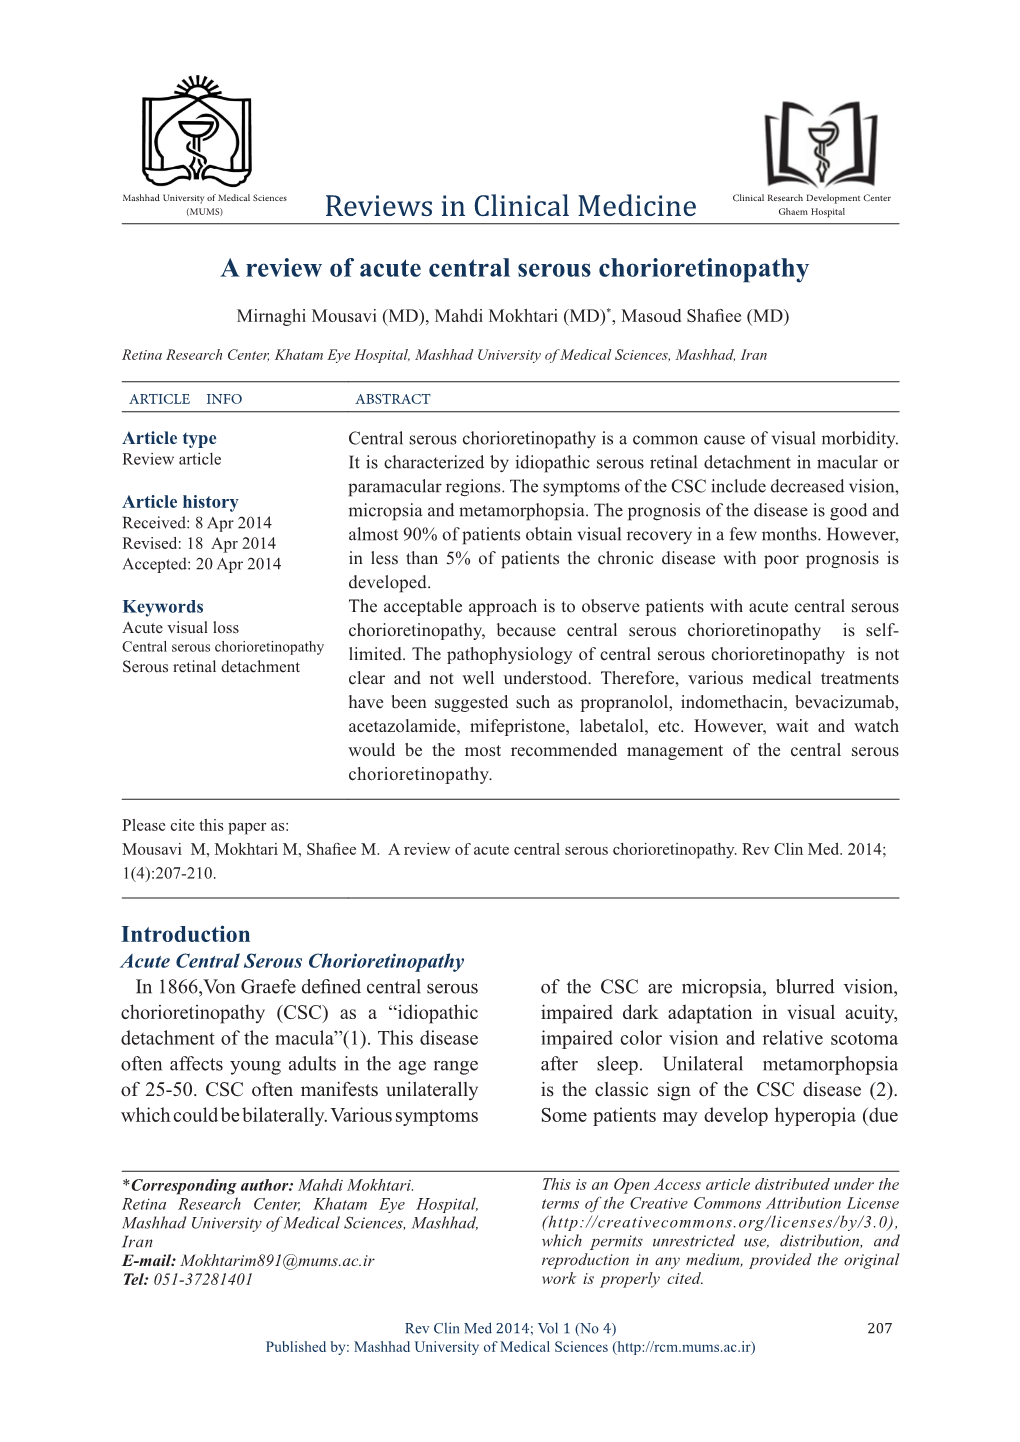 A Review of Acute Central Serous Chorioretinopathy